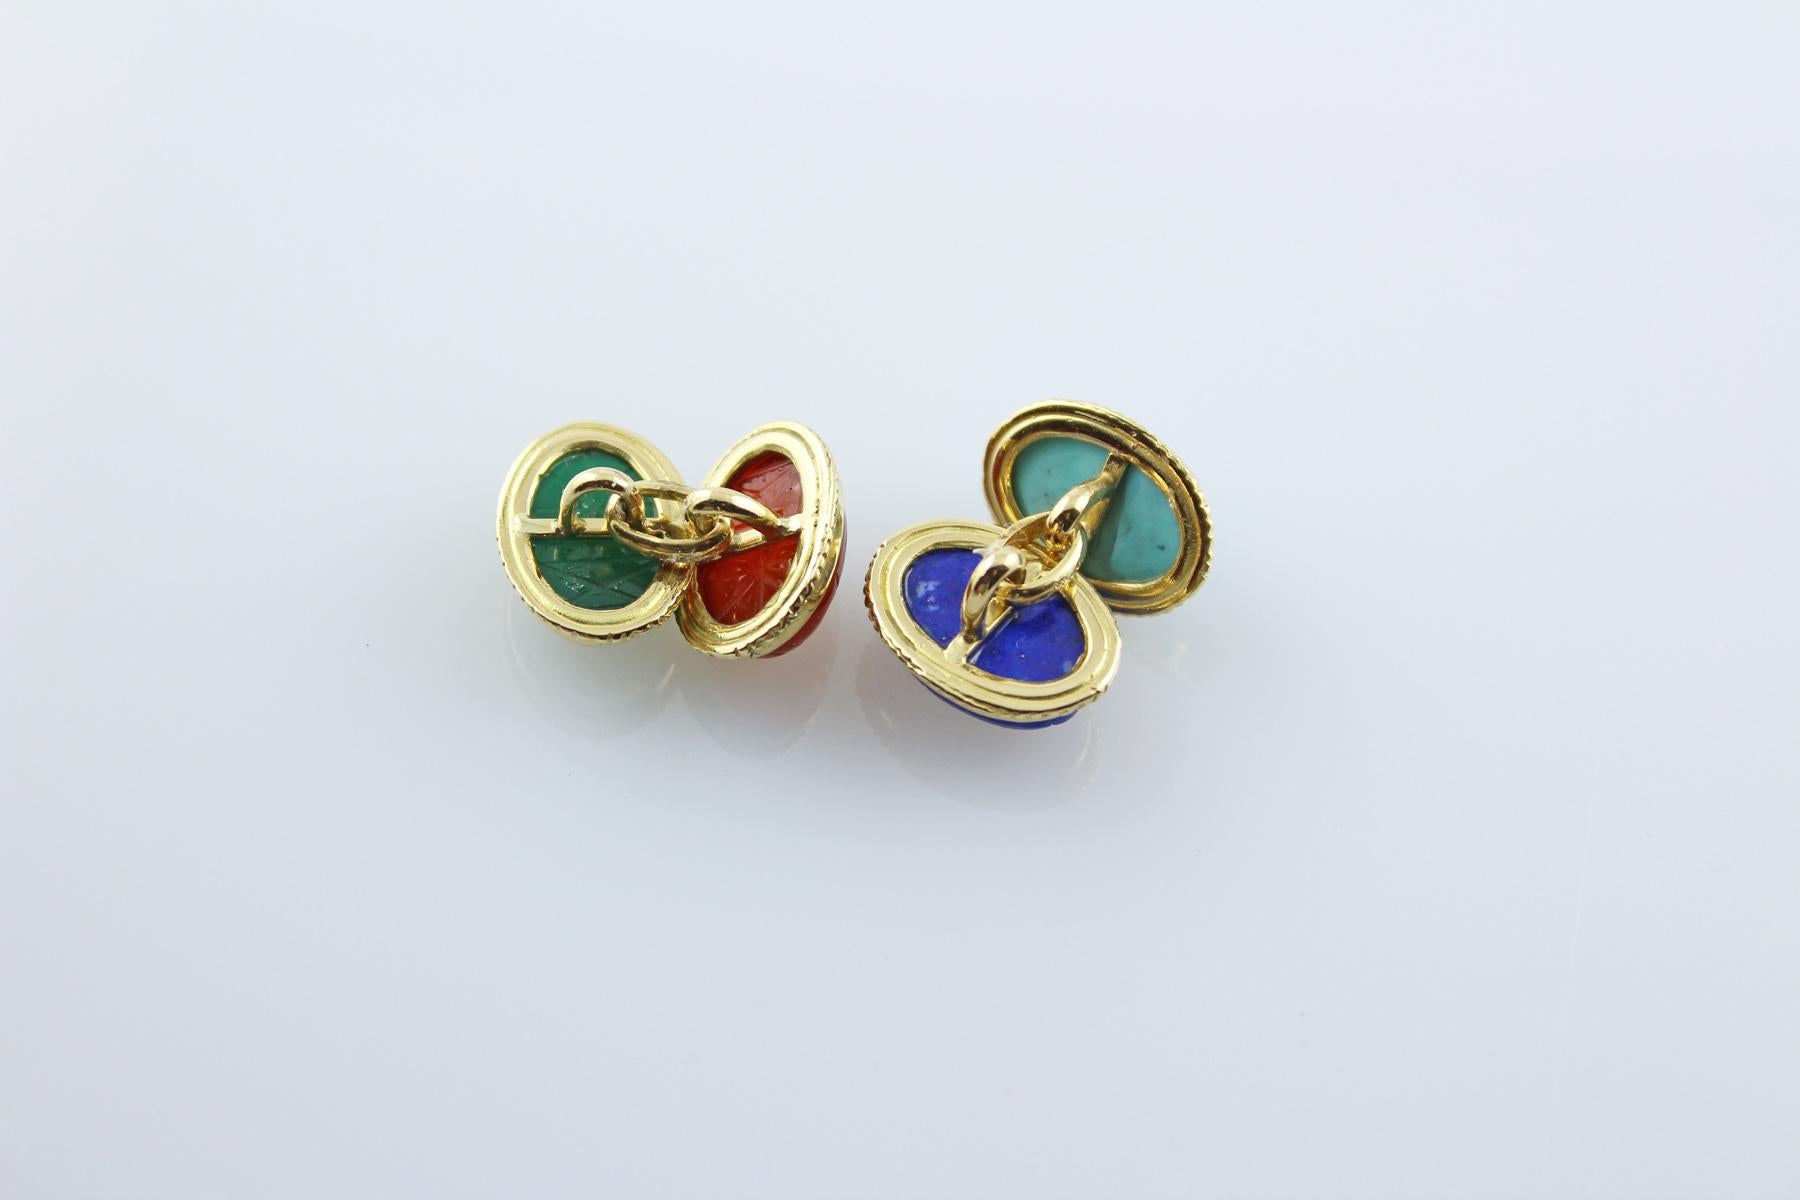 These cufflinks are created with fours hand-carved beetles, one in turquoise, one in carnelian, one in lapis lazuli and one in jade.
Is also possible have them with all the four beetle in the same stone.
The mounting is in 18 karat yellow